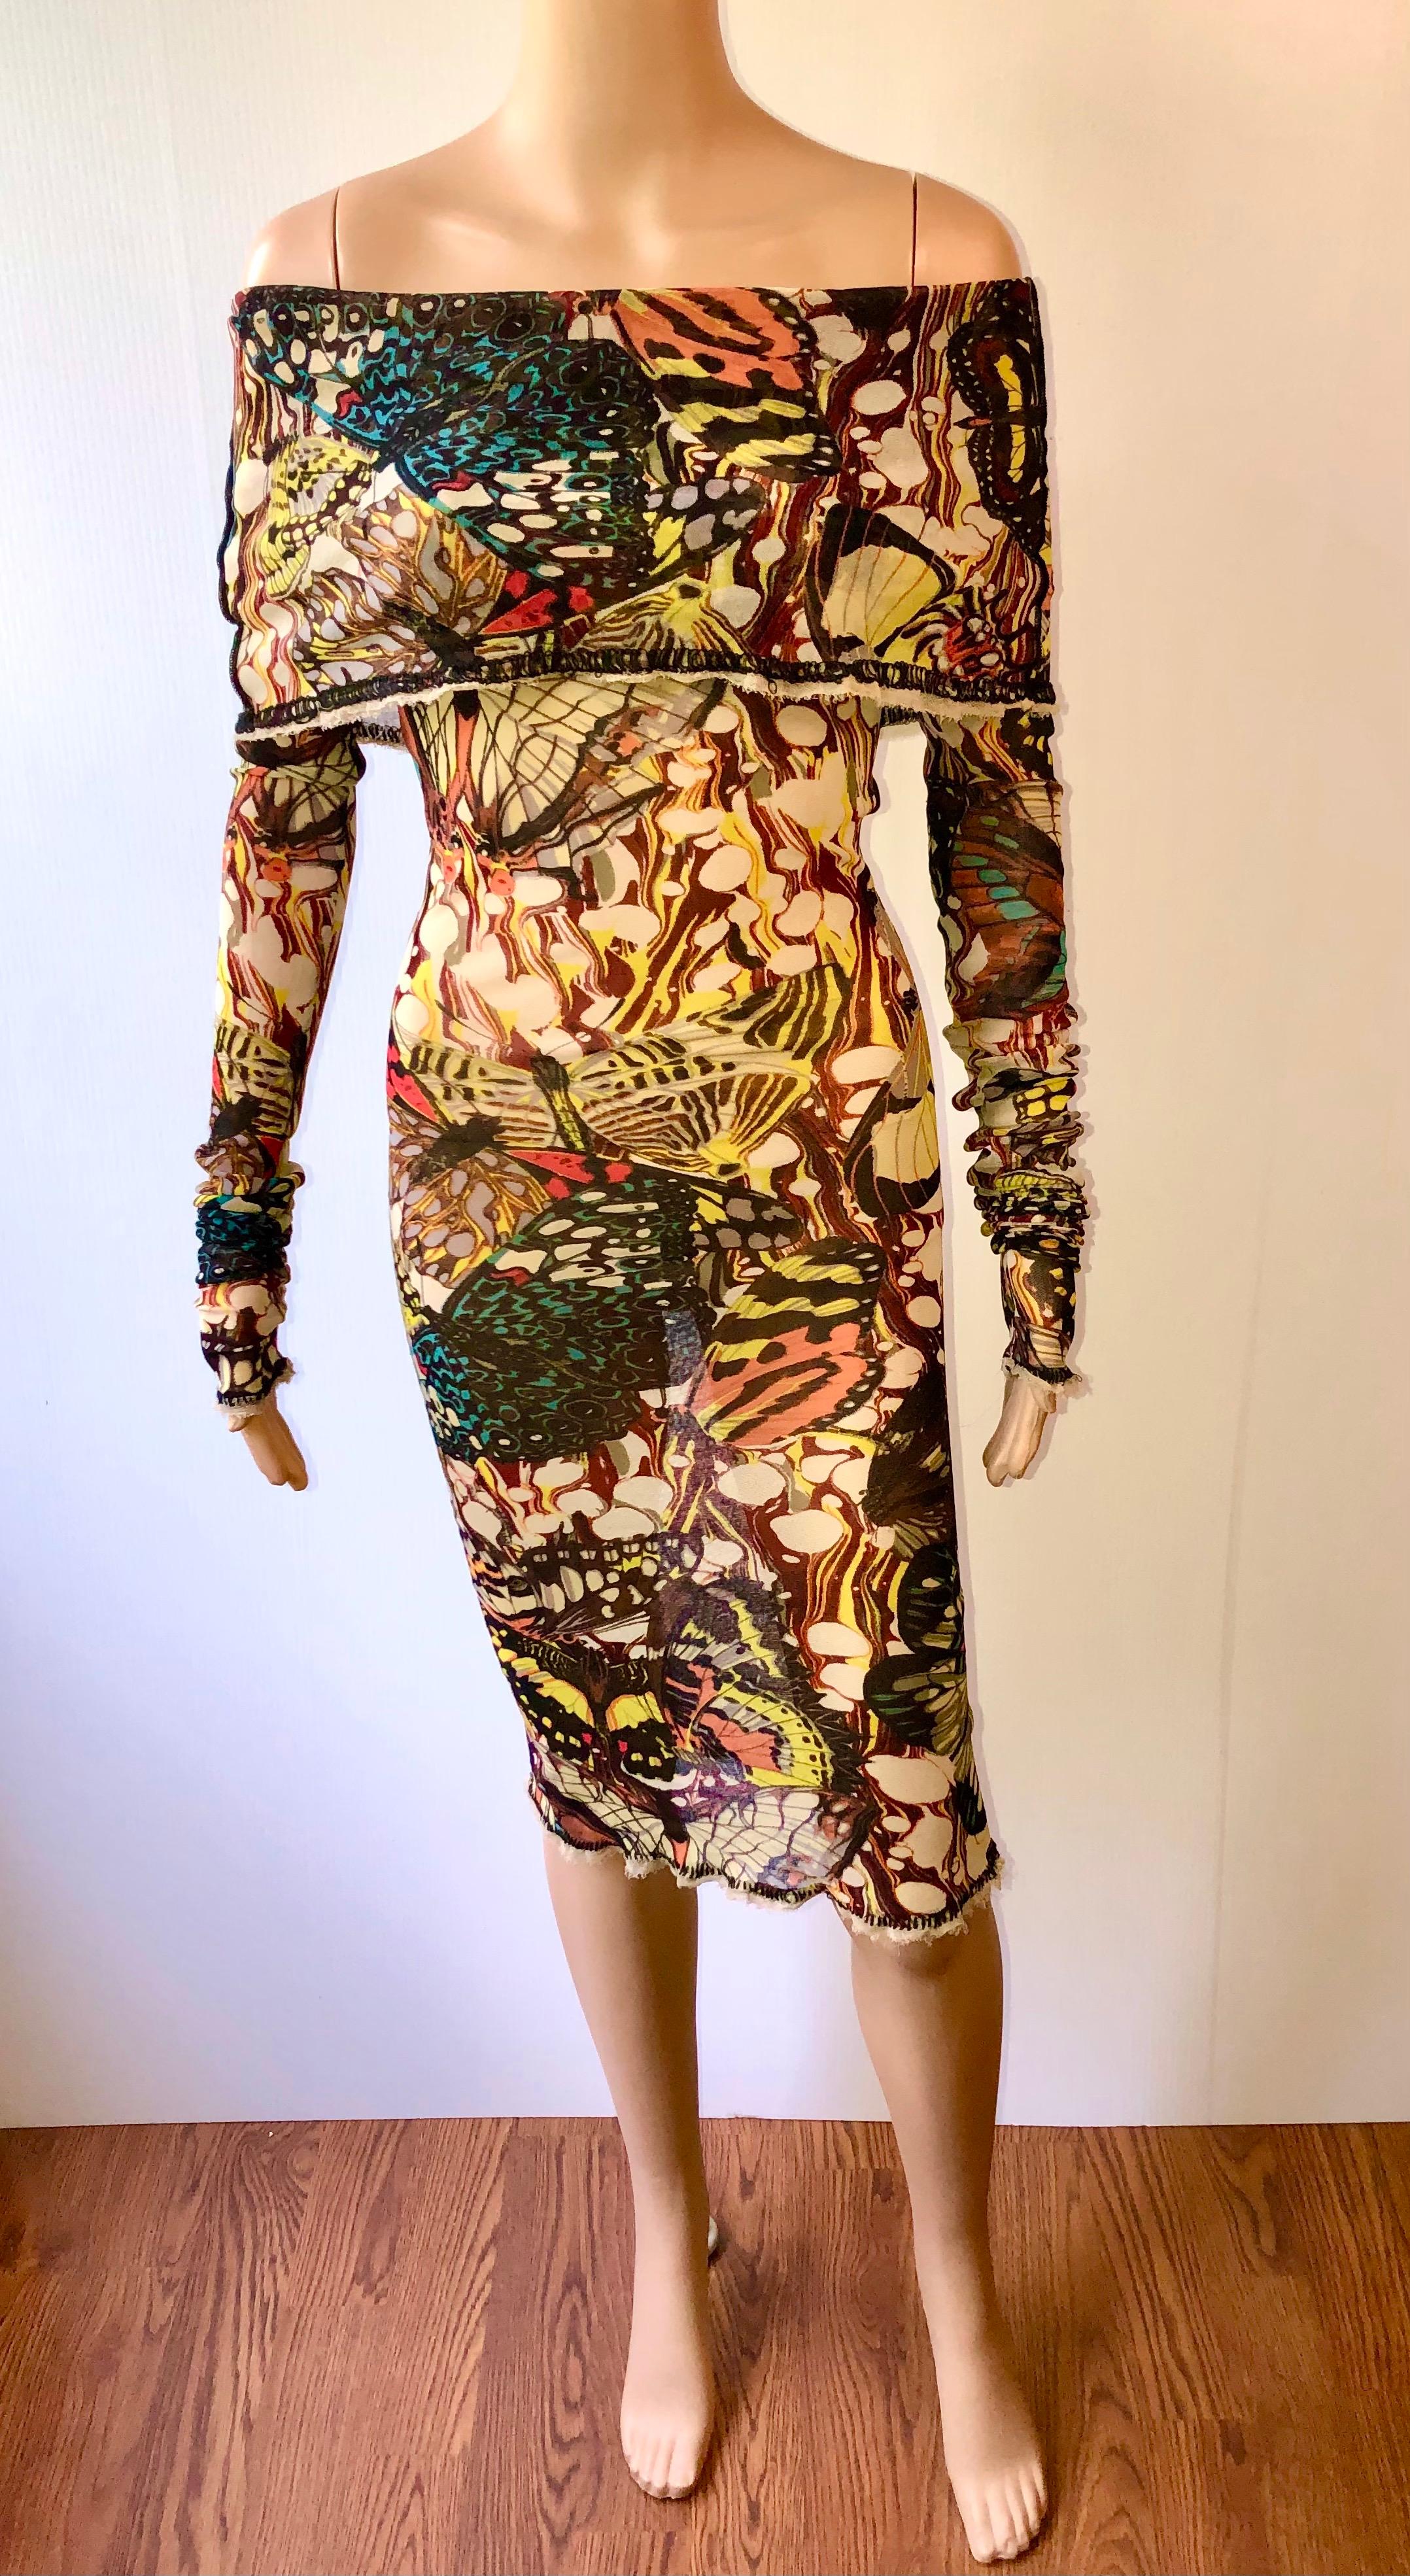 Jean Paul Gaultier S/S 2003 Vintage Butterfly Print Semi-Sheer Mesh Off Shoulder Bodycon Dress Size M

Please note this dress is very versatile and it could be styled a few different ways based on preference.  All tags removed due to sheerness.